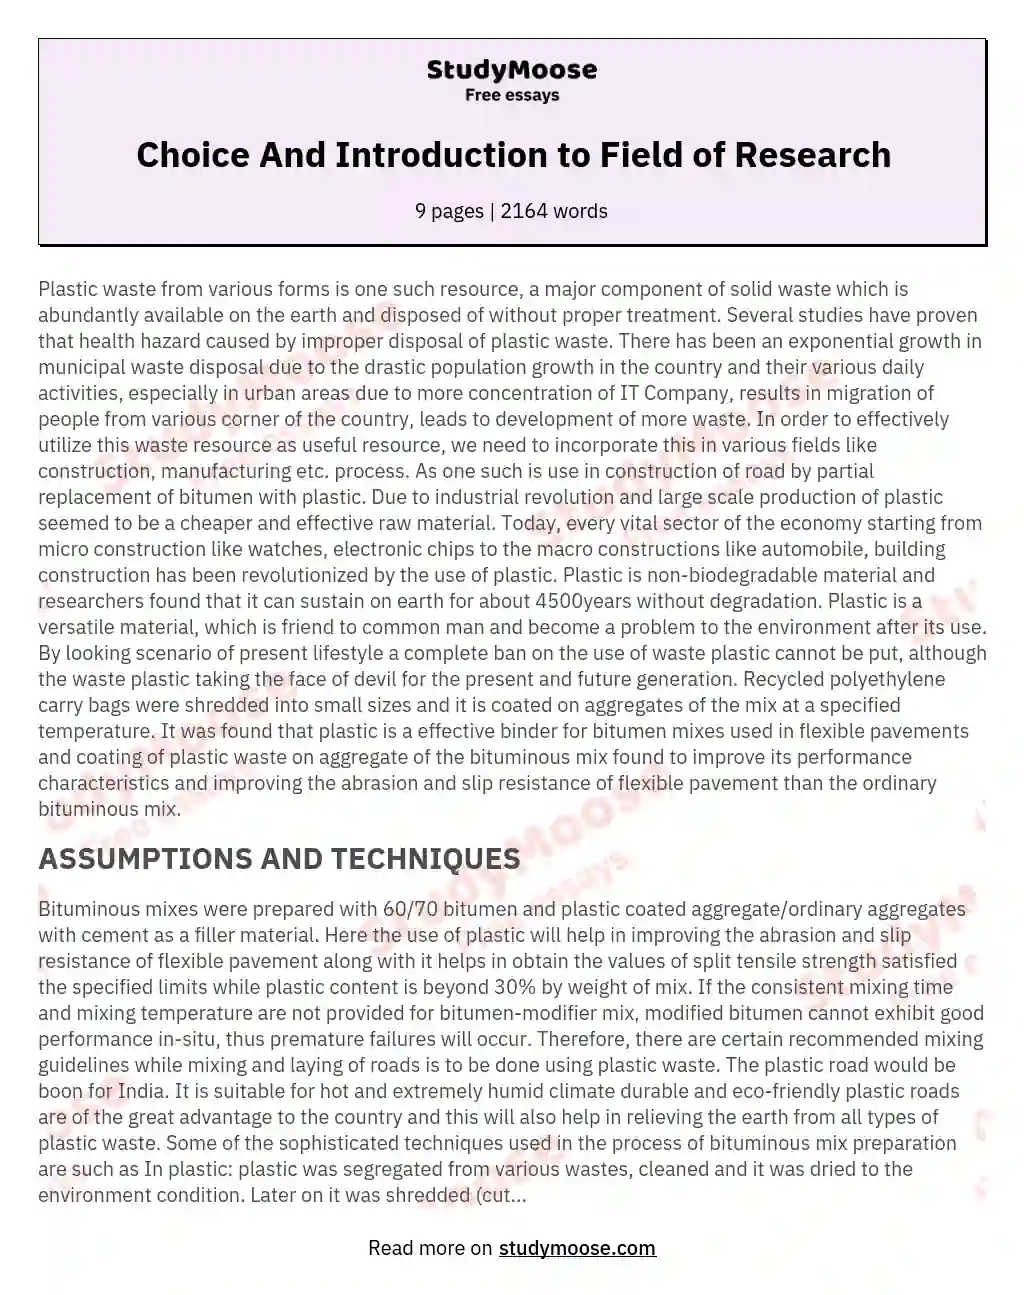 Choice And Introduction to Field of Research essay